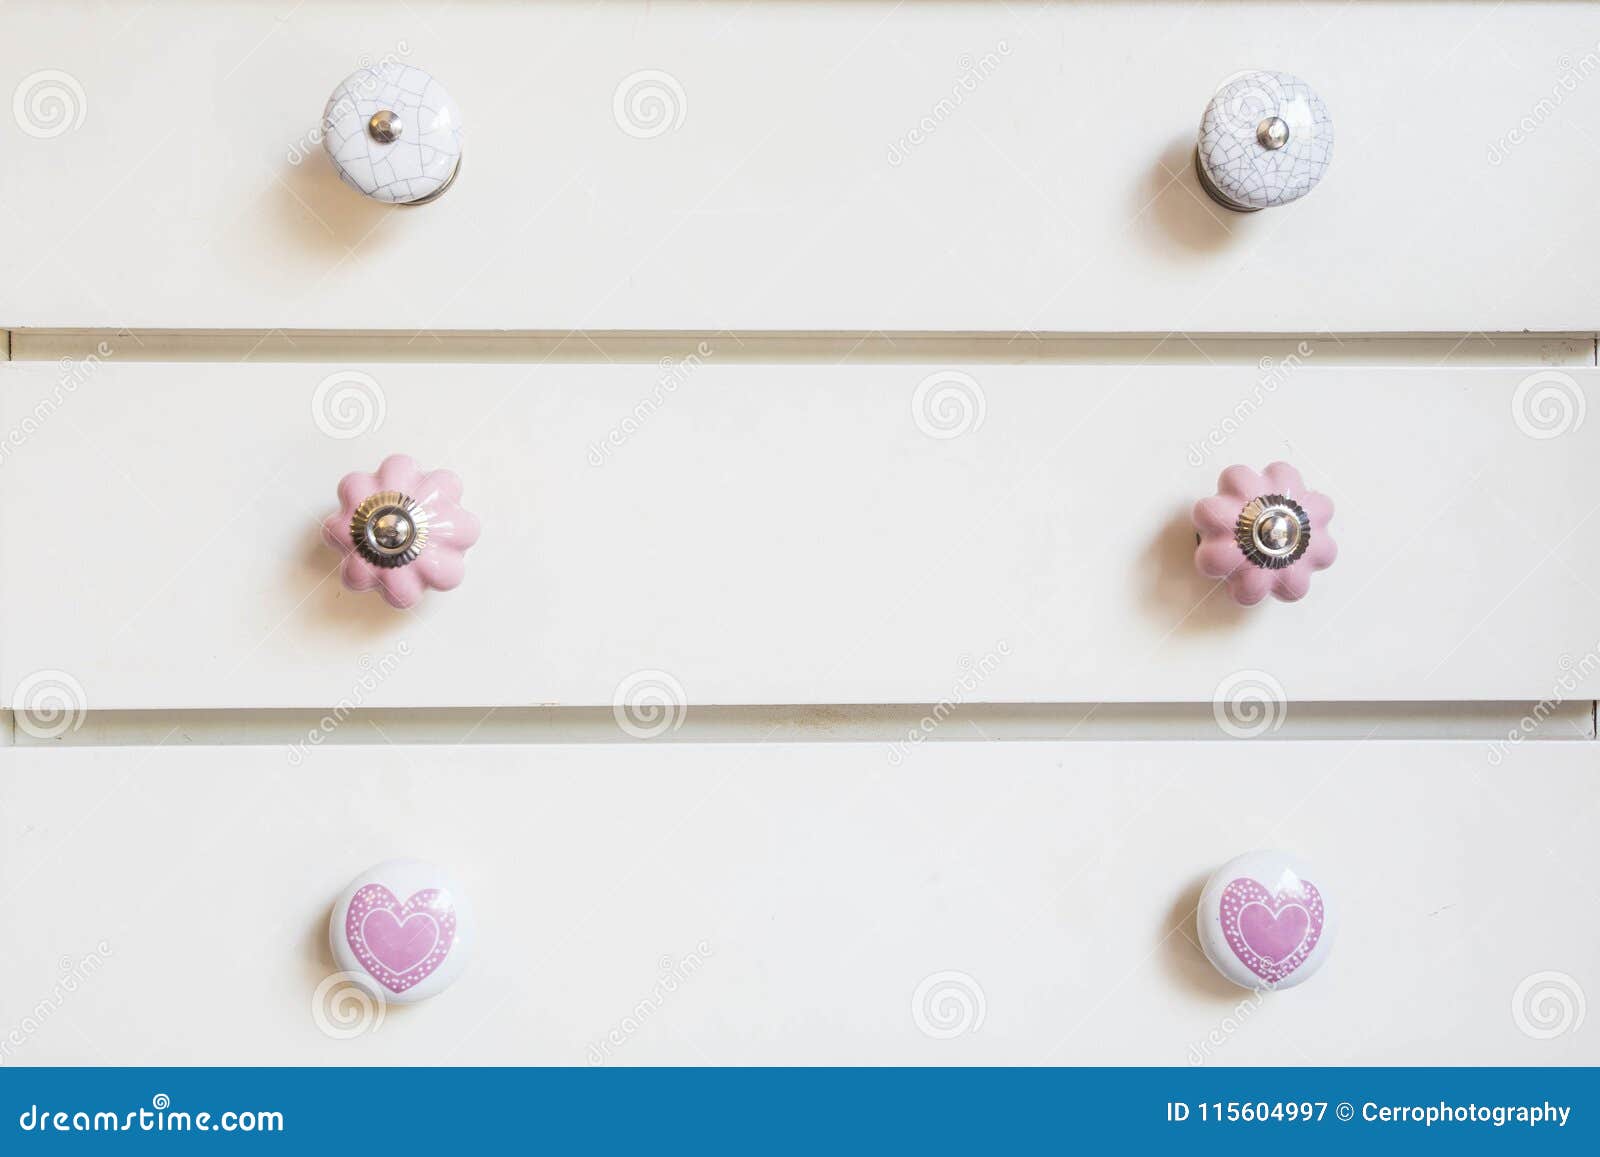 white closet doors with colorful knobs